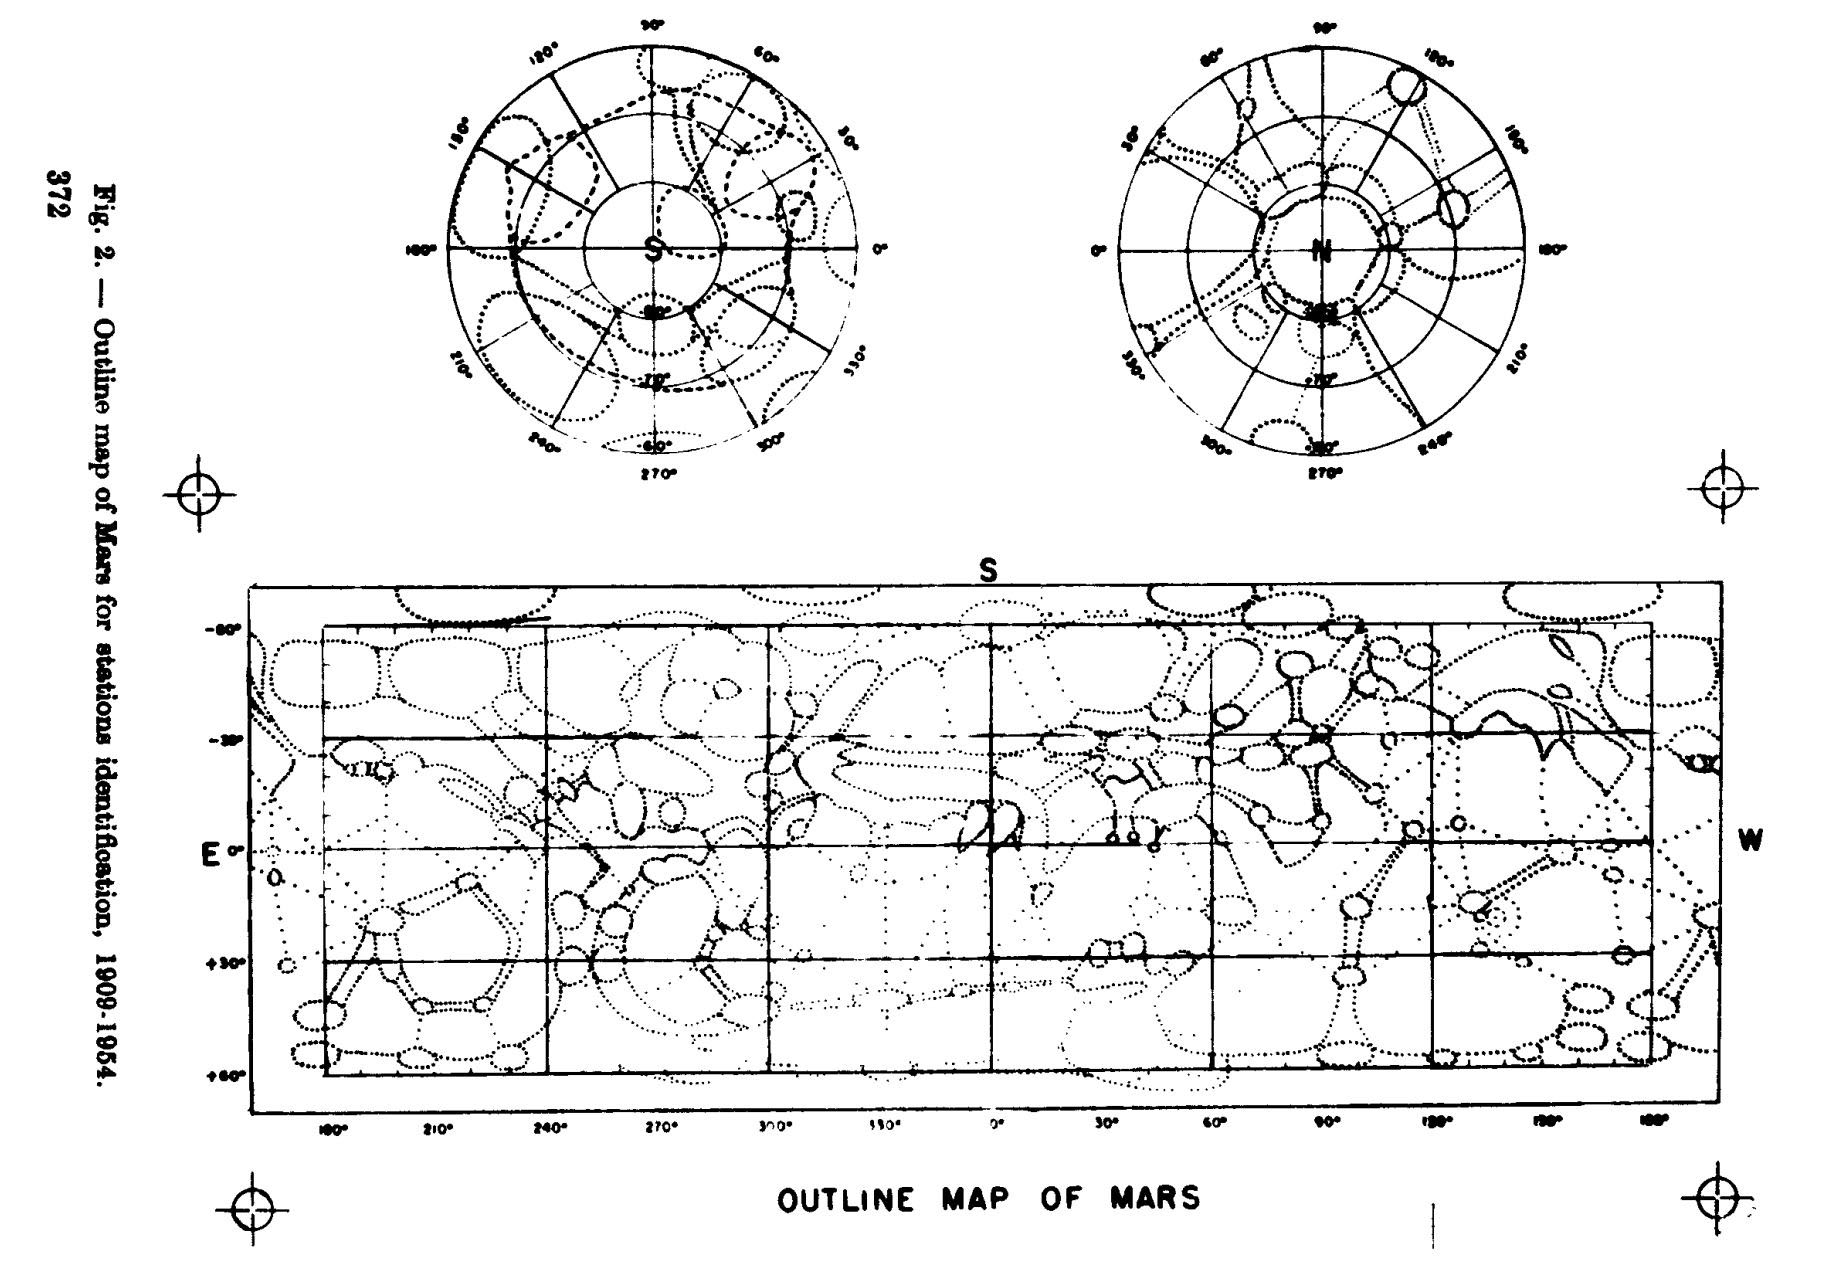 Outline map of Mars 1962